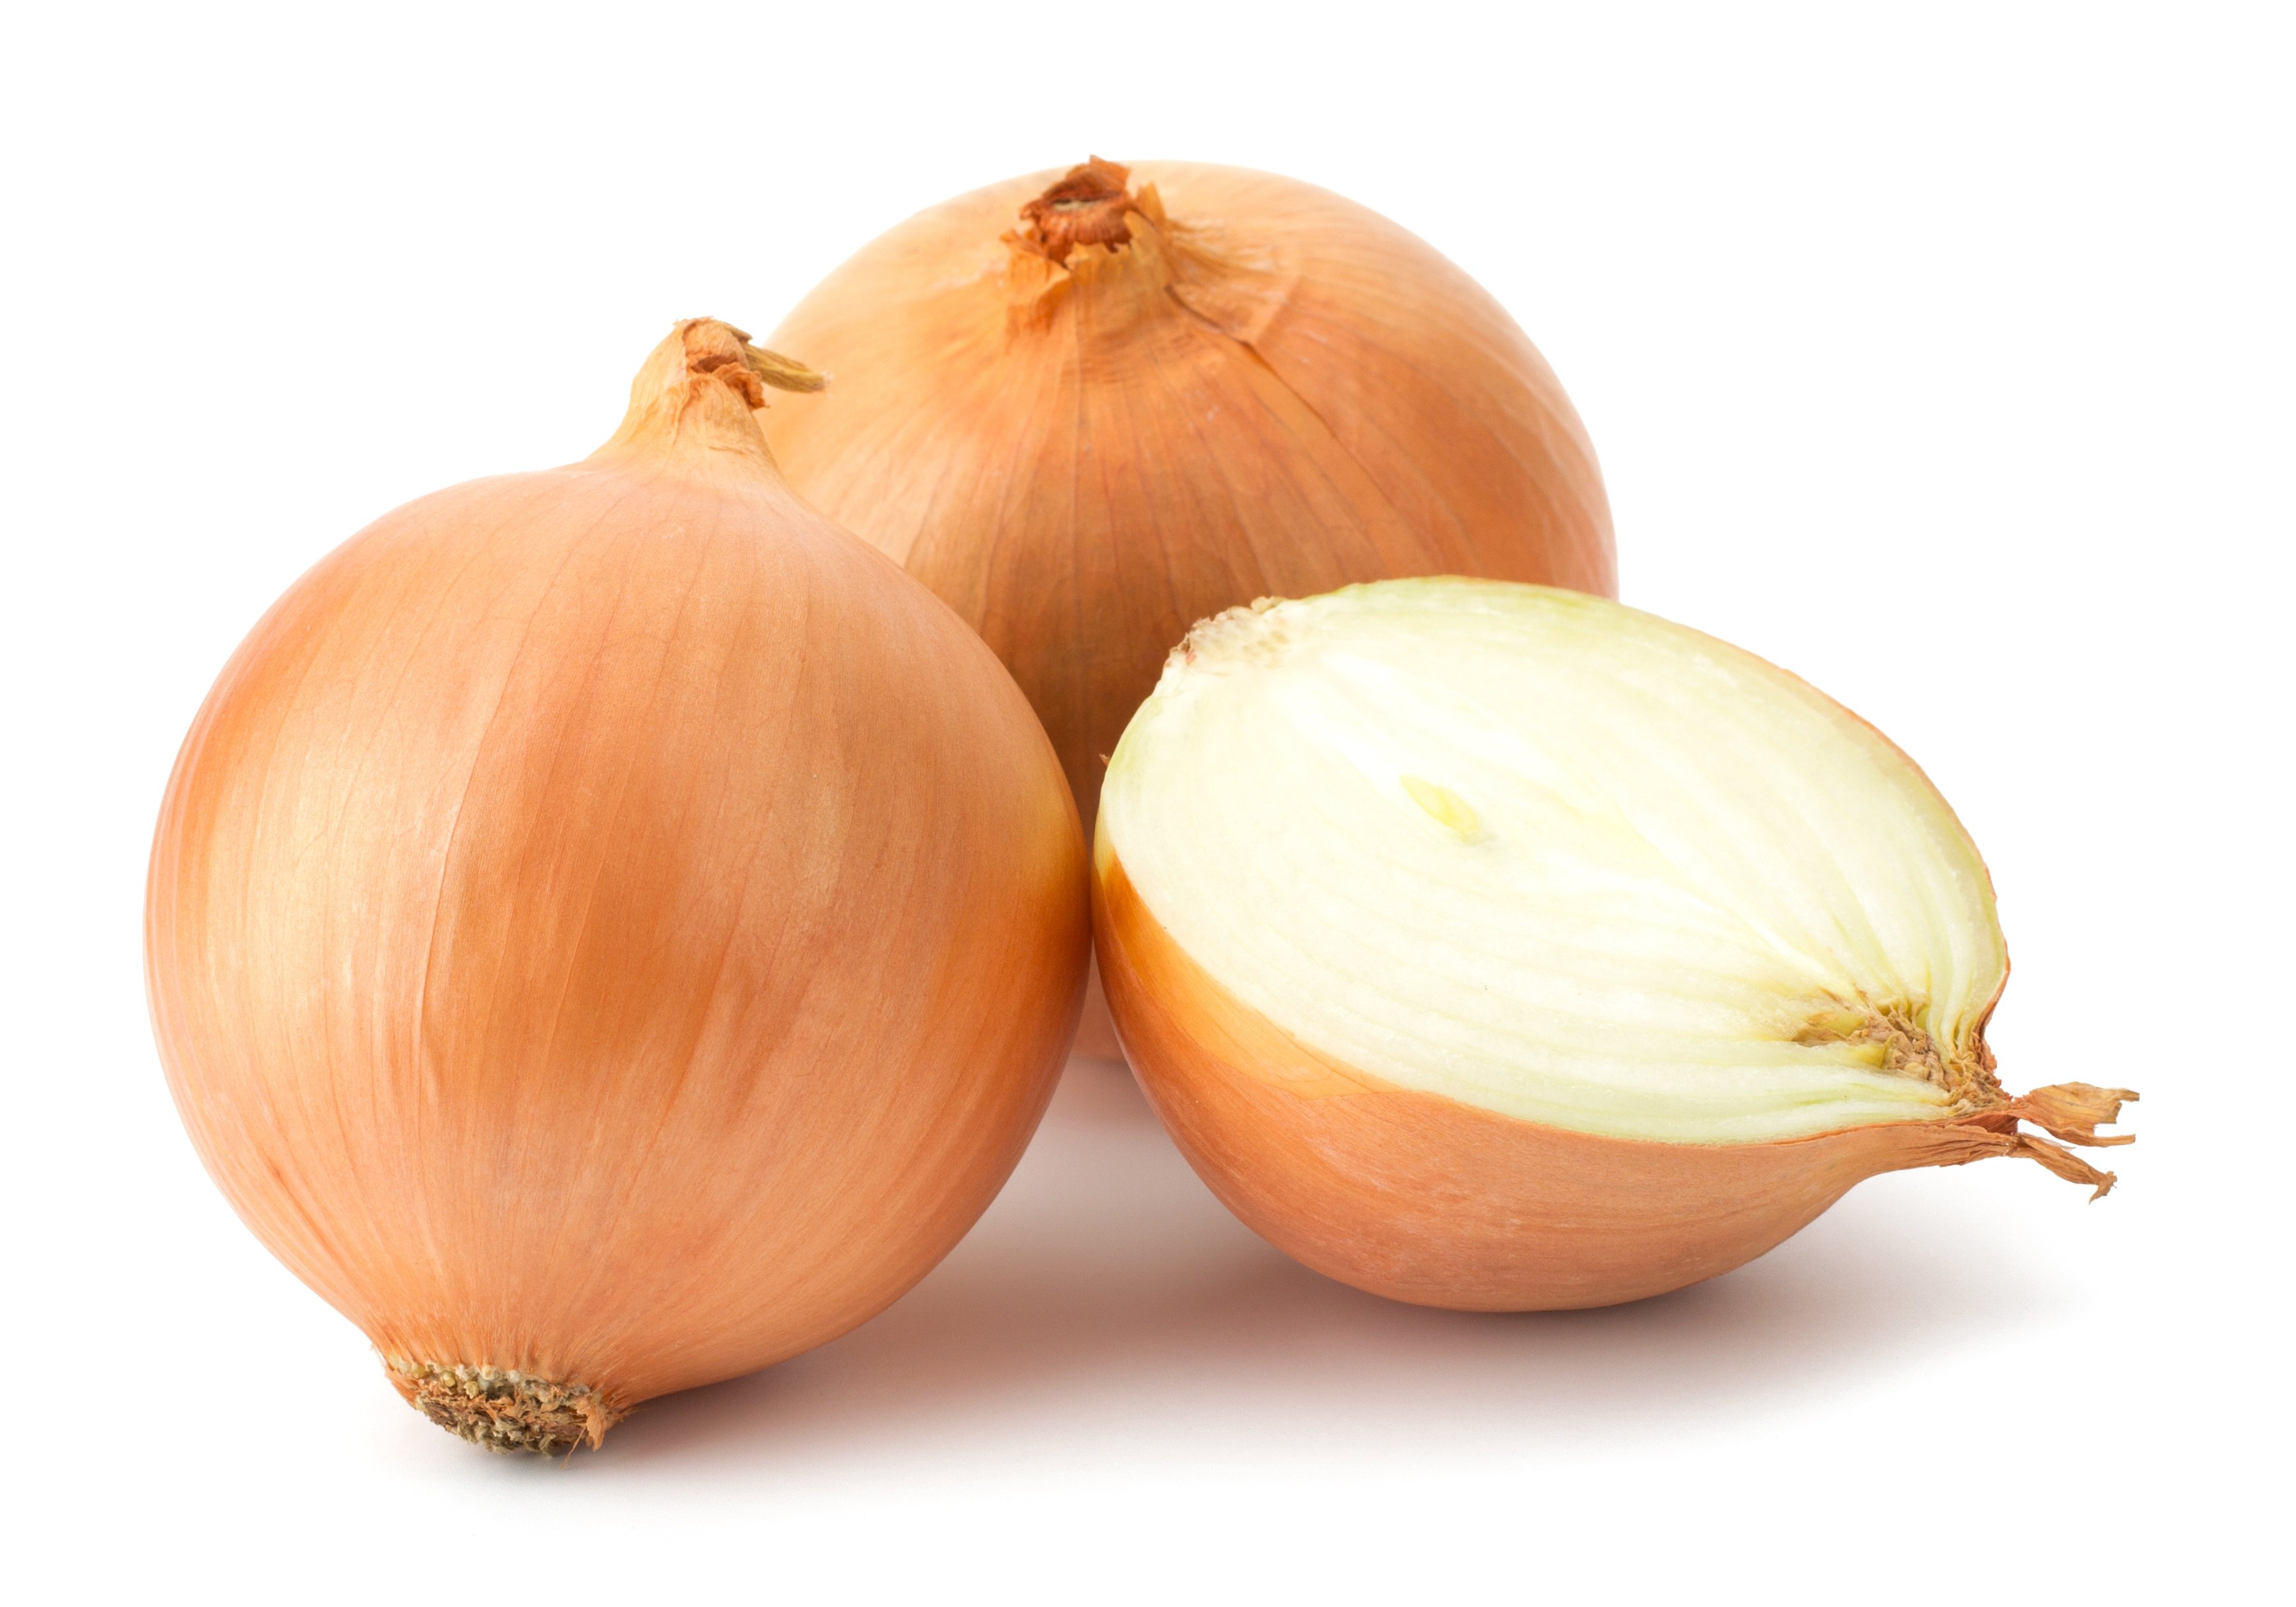 leVocab sur Twitter : "OIGNON: the gender of
                the French word for onion is masculine...l'oignon
                #mfltwitterati #mflire #learnfrench
                https://t.co/cXrYGFqp3r" / Twitter